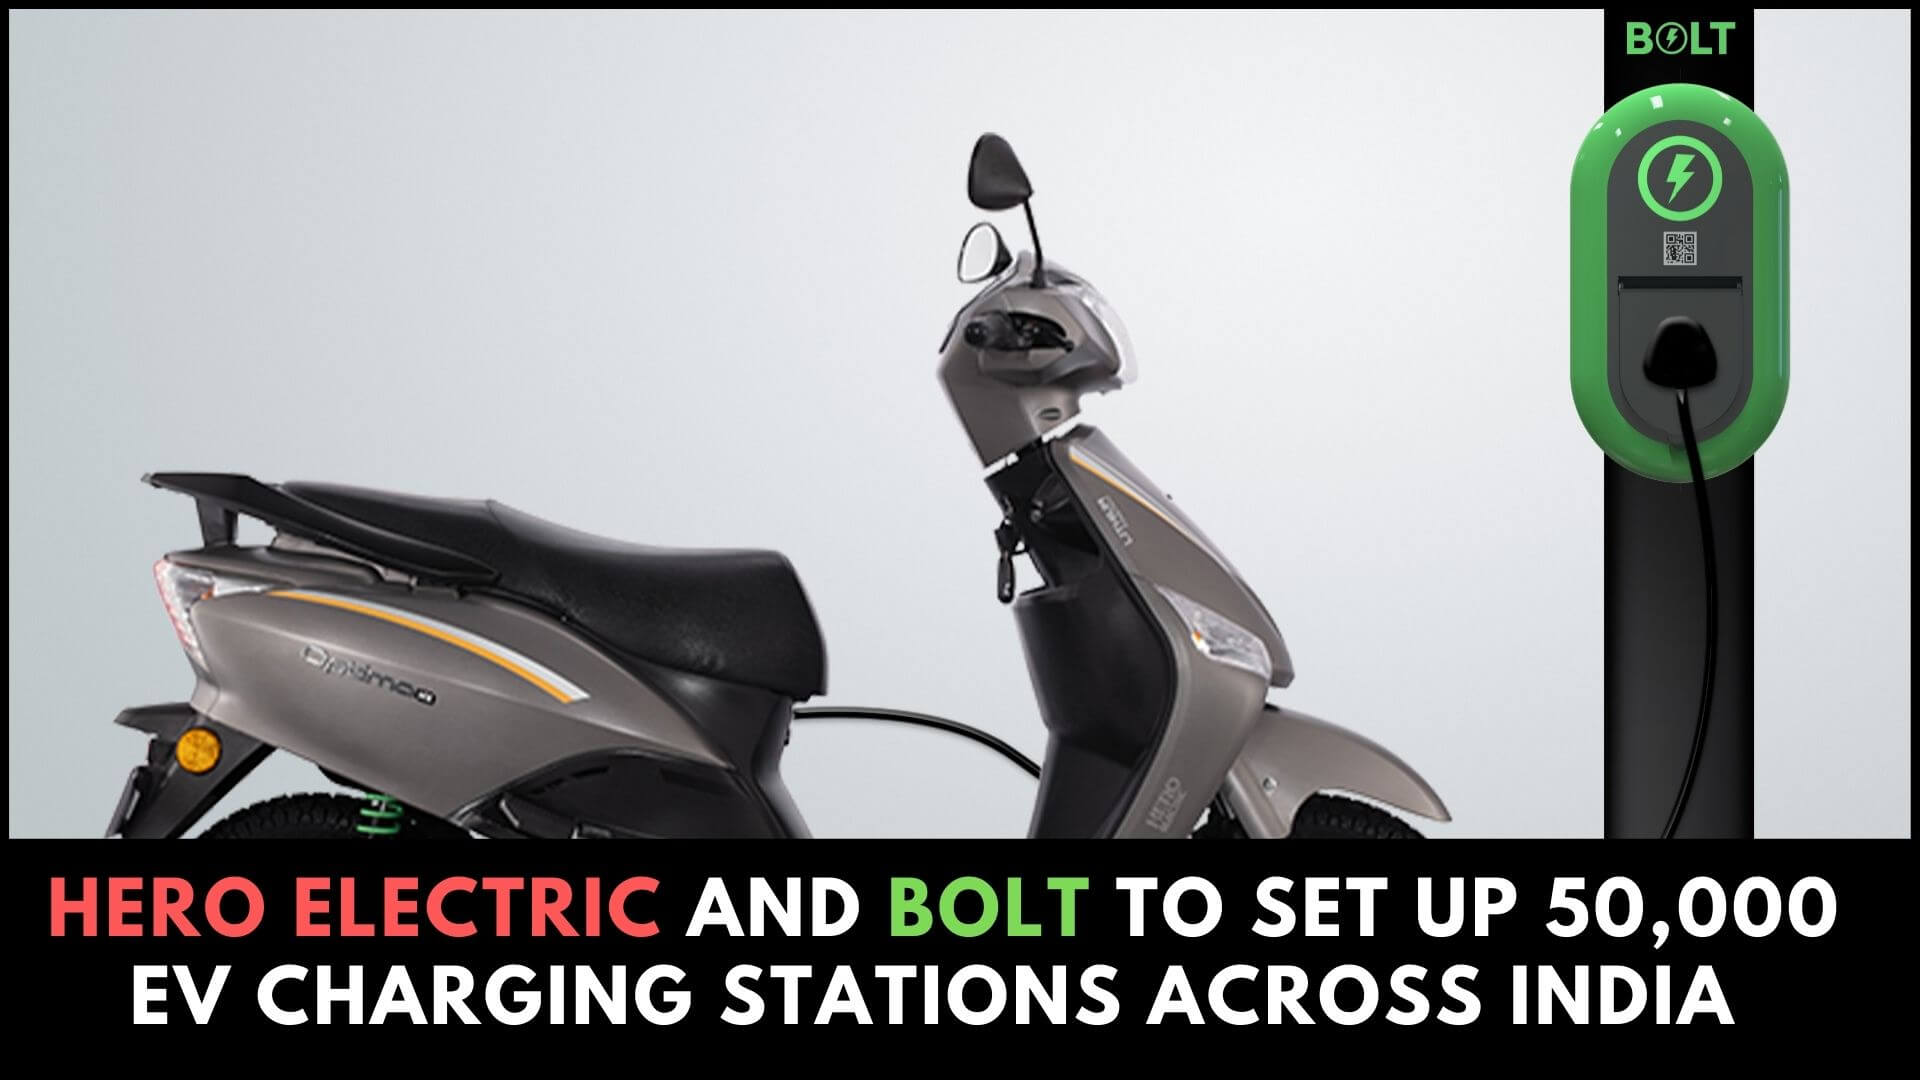 https://e-vehicleinfo.com/hero-electric-and-bolt-to-set-up-50000-ev-charging-stations-across-india/